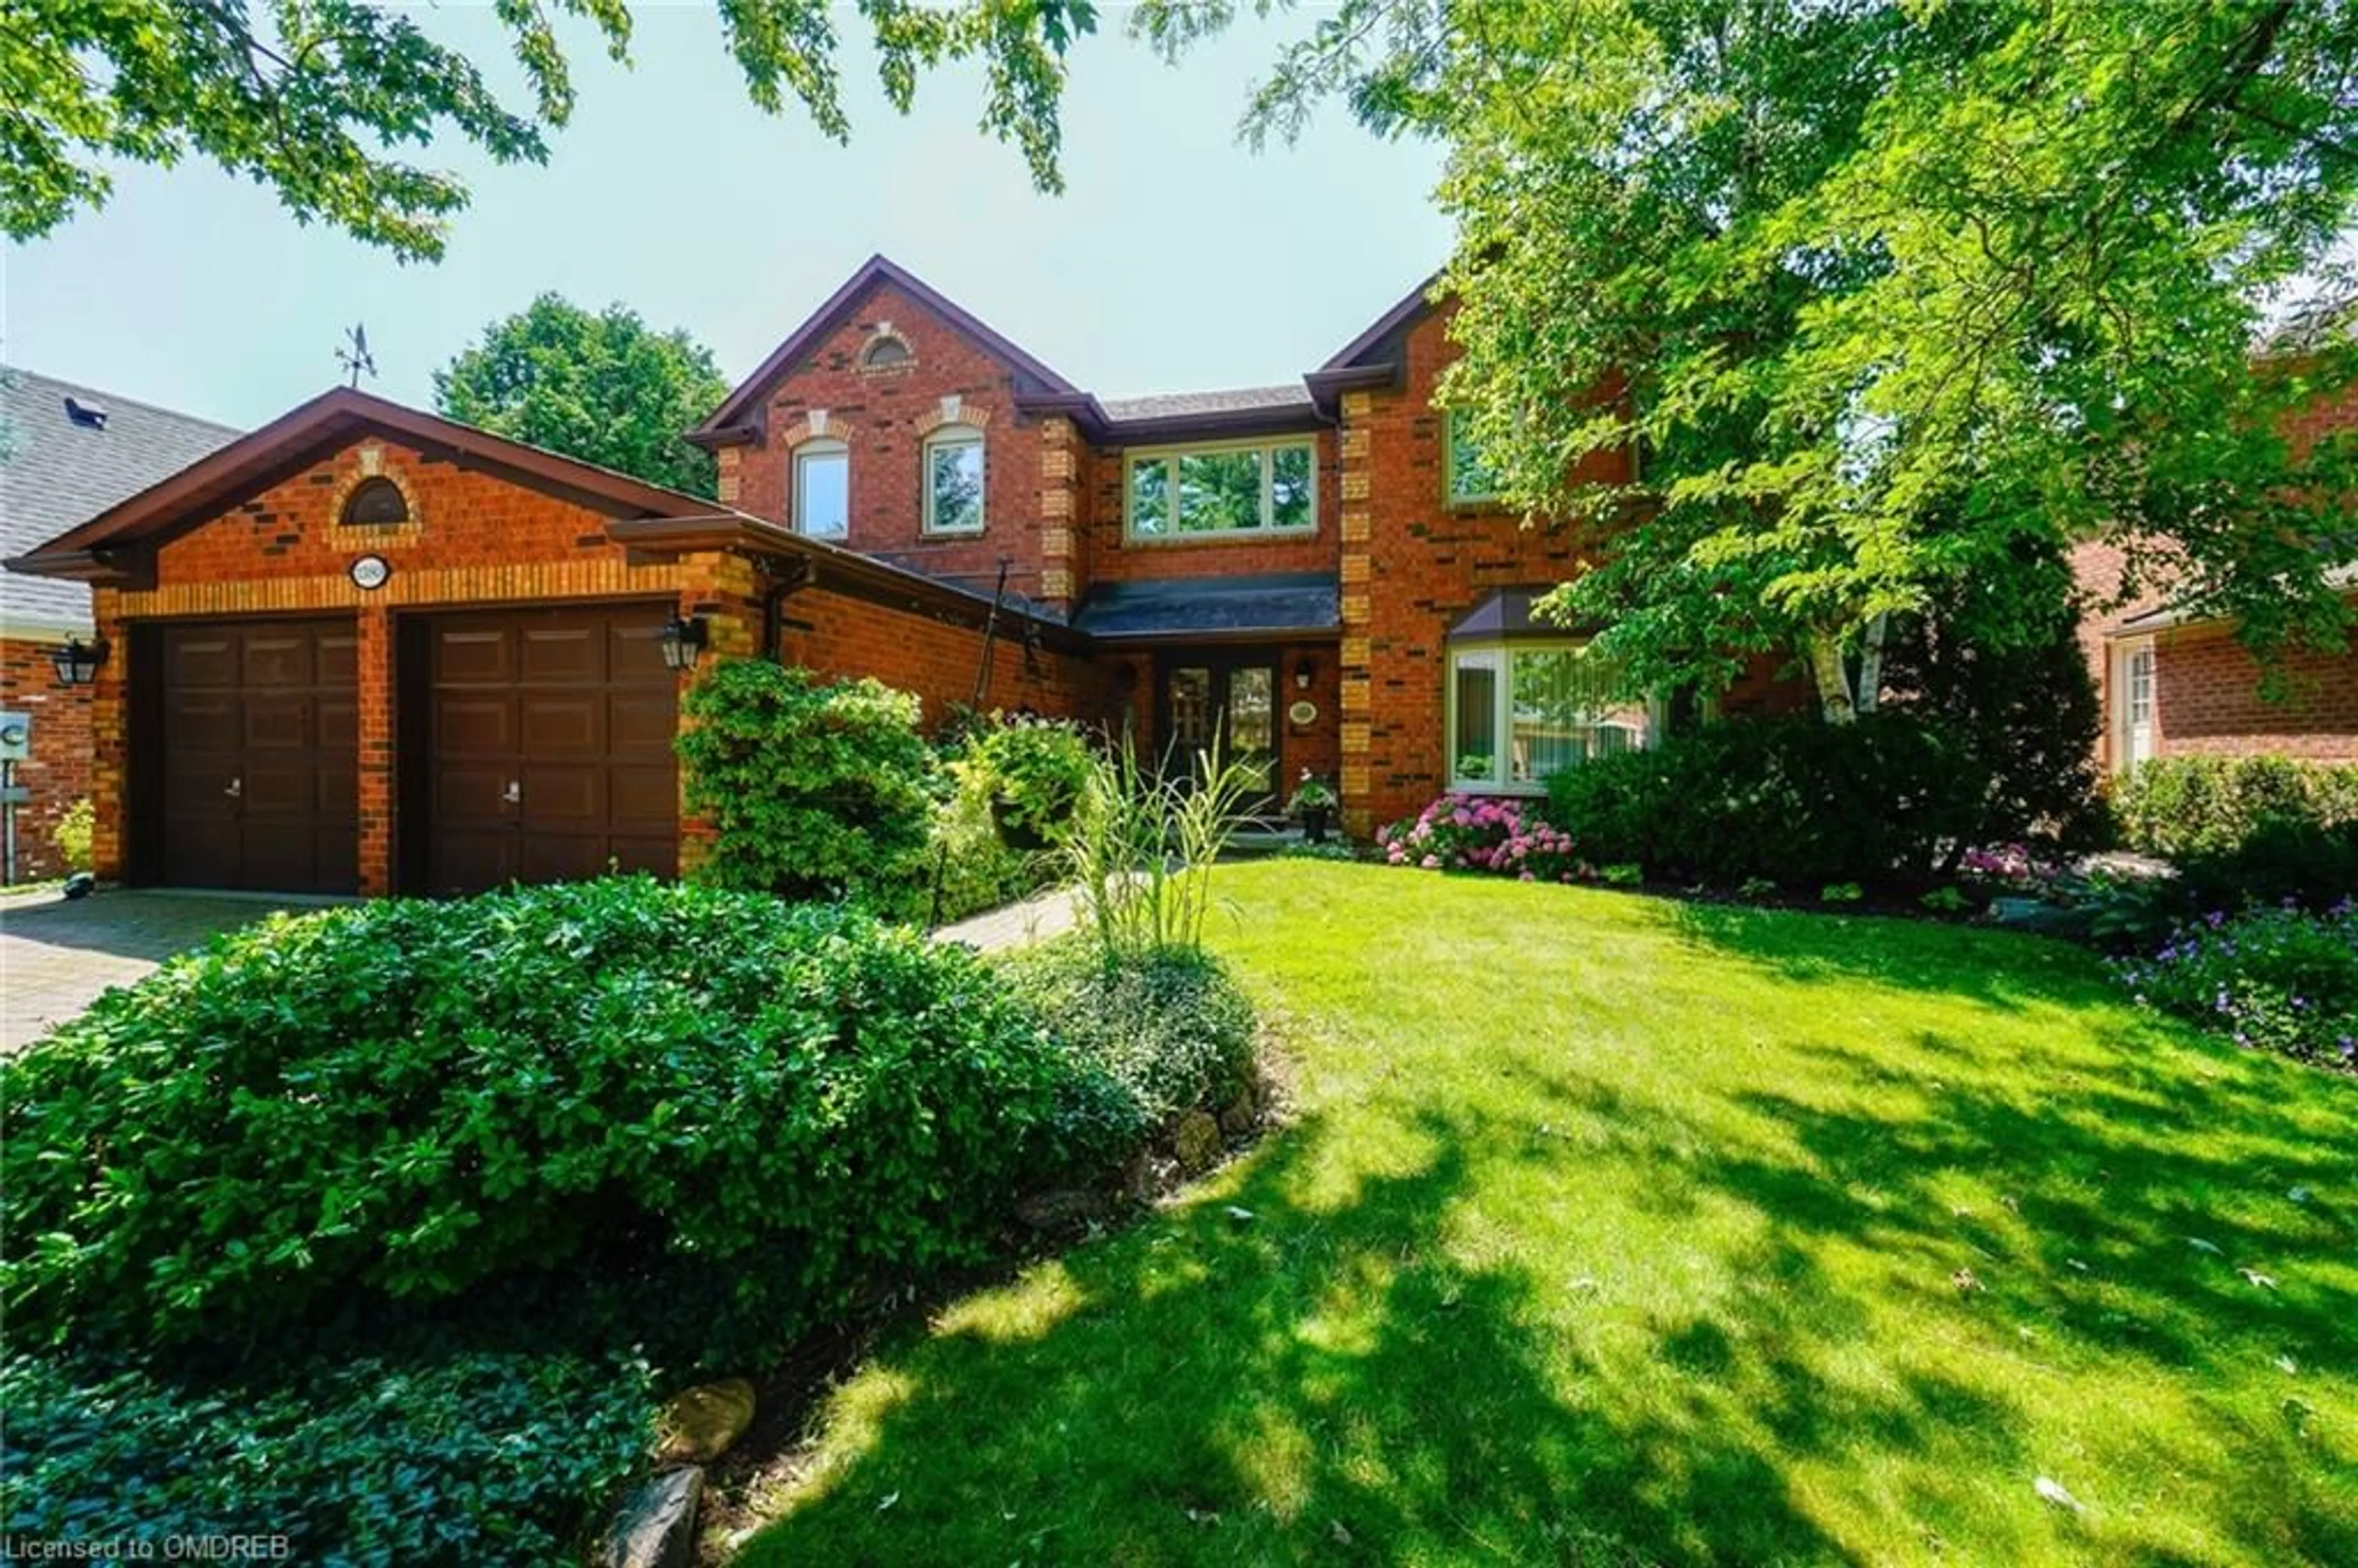 Home with brick exterior material for 1380 Merrybrook Lane, Oakville Ontario L6M 1T4